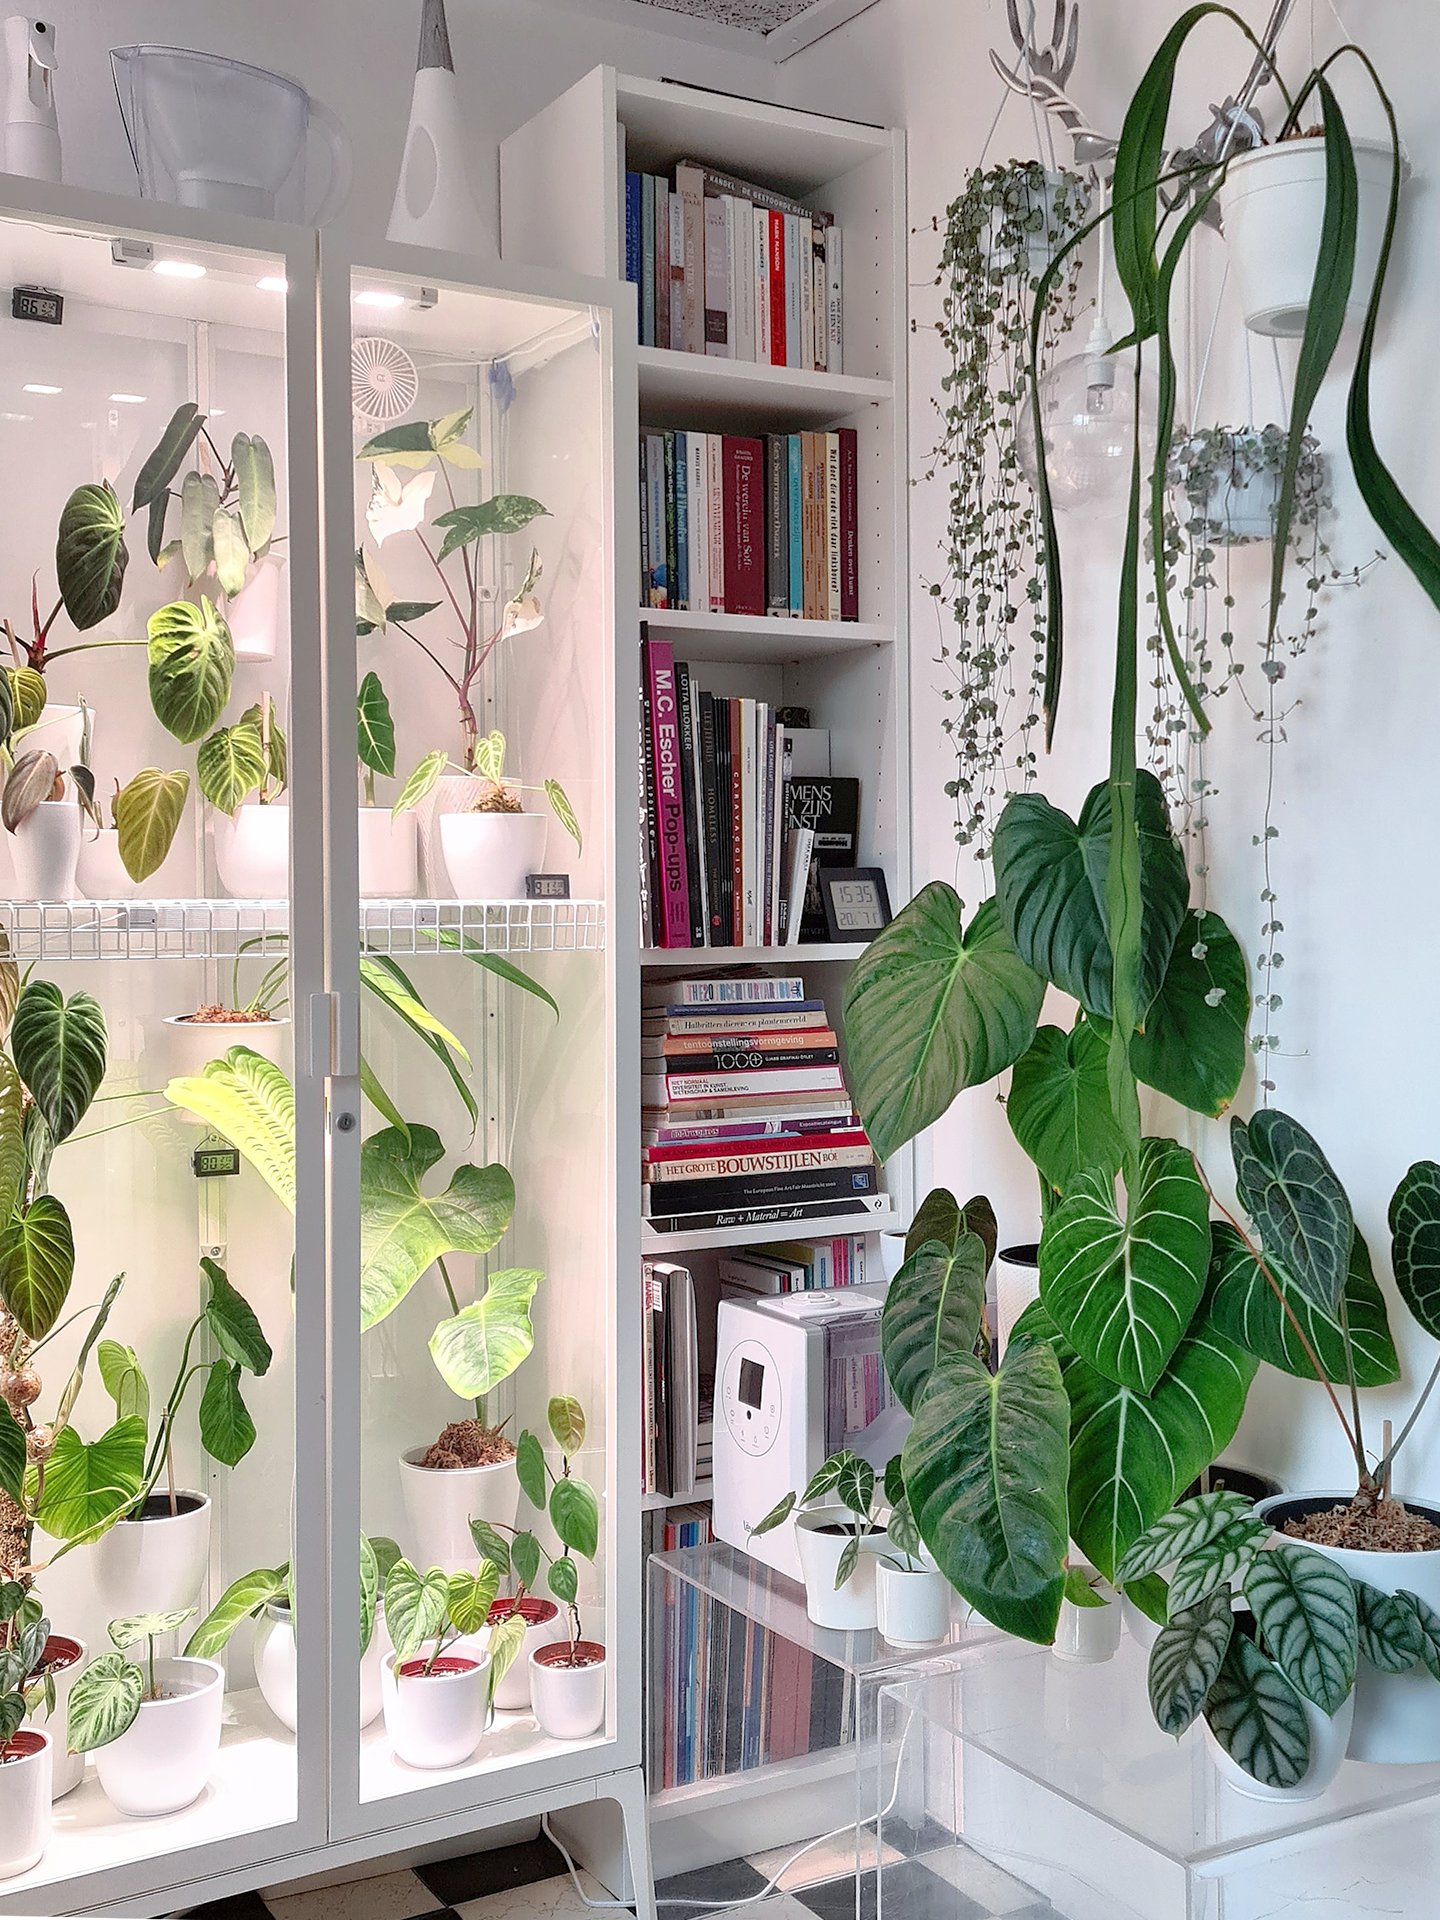 Appartement blozen taxi This IKEA Staple Moonlights as a Greenhouse | domino